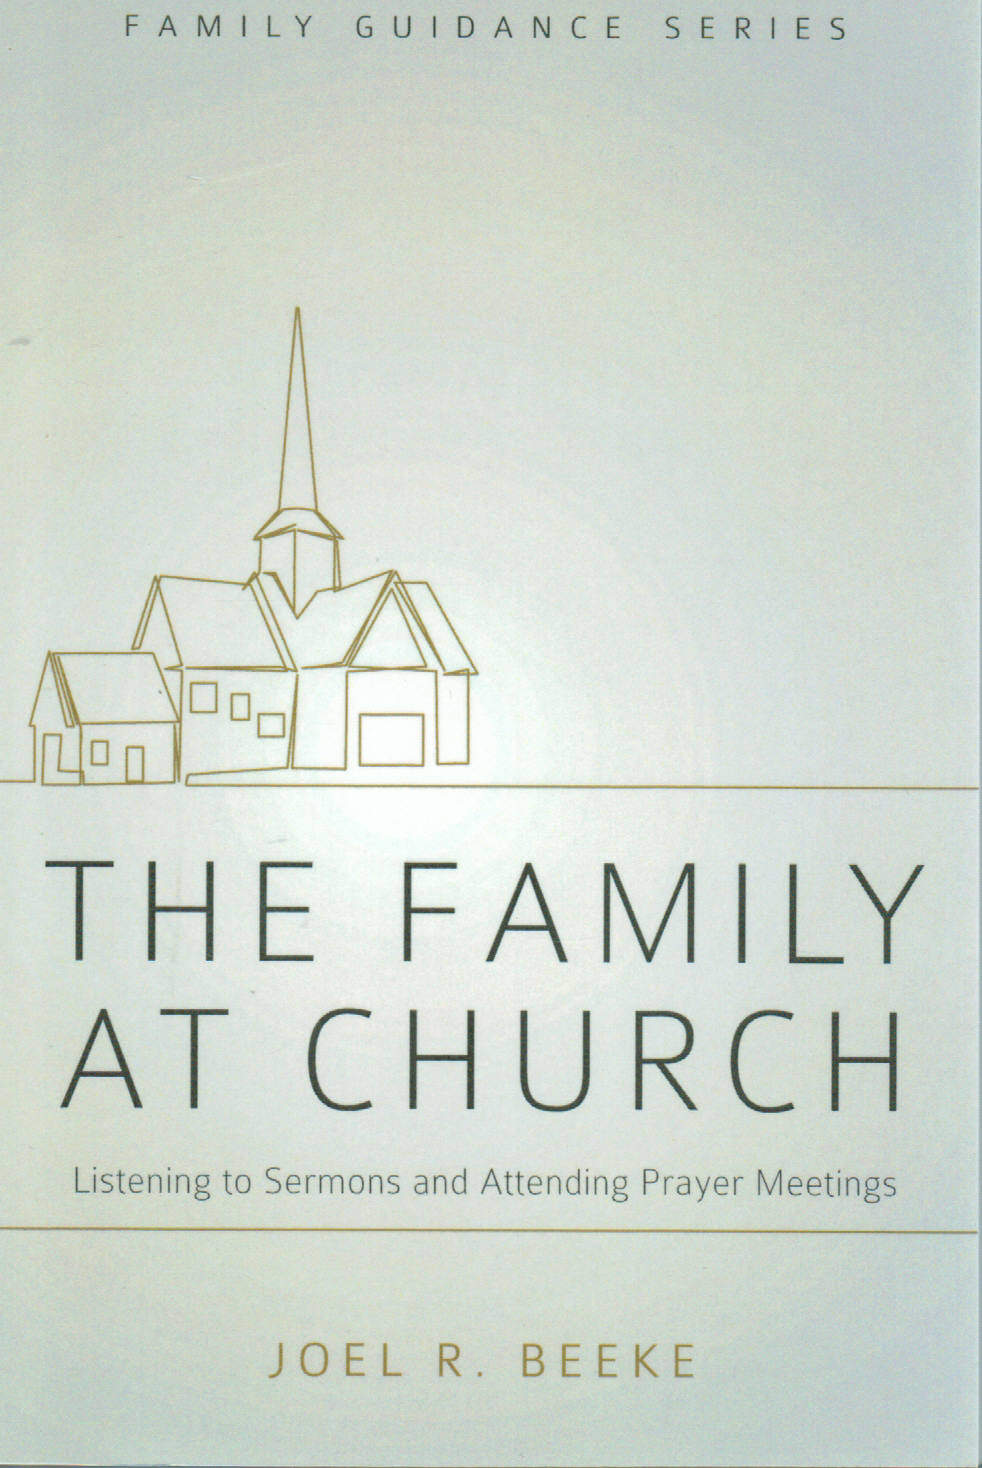 Family Guidance Series - The Family at Church: Listening to Sermons and Attending Prayer Meetings